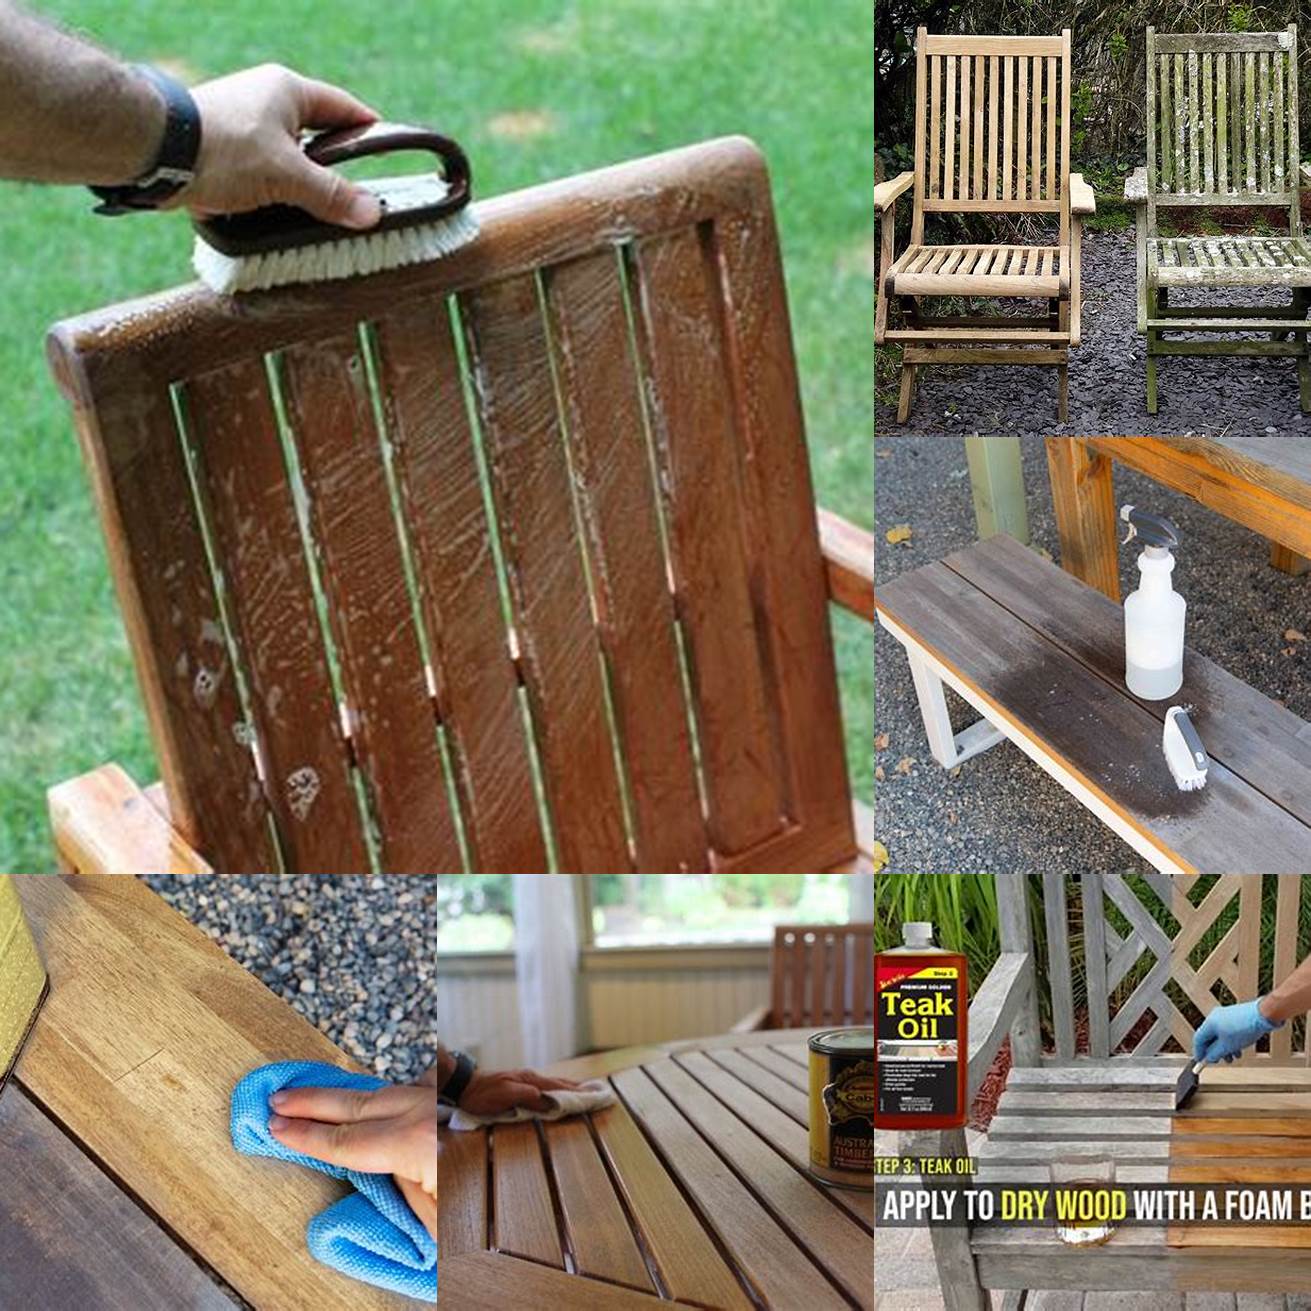 Cleaning the Teak Wood